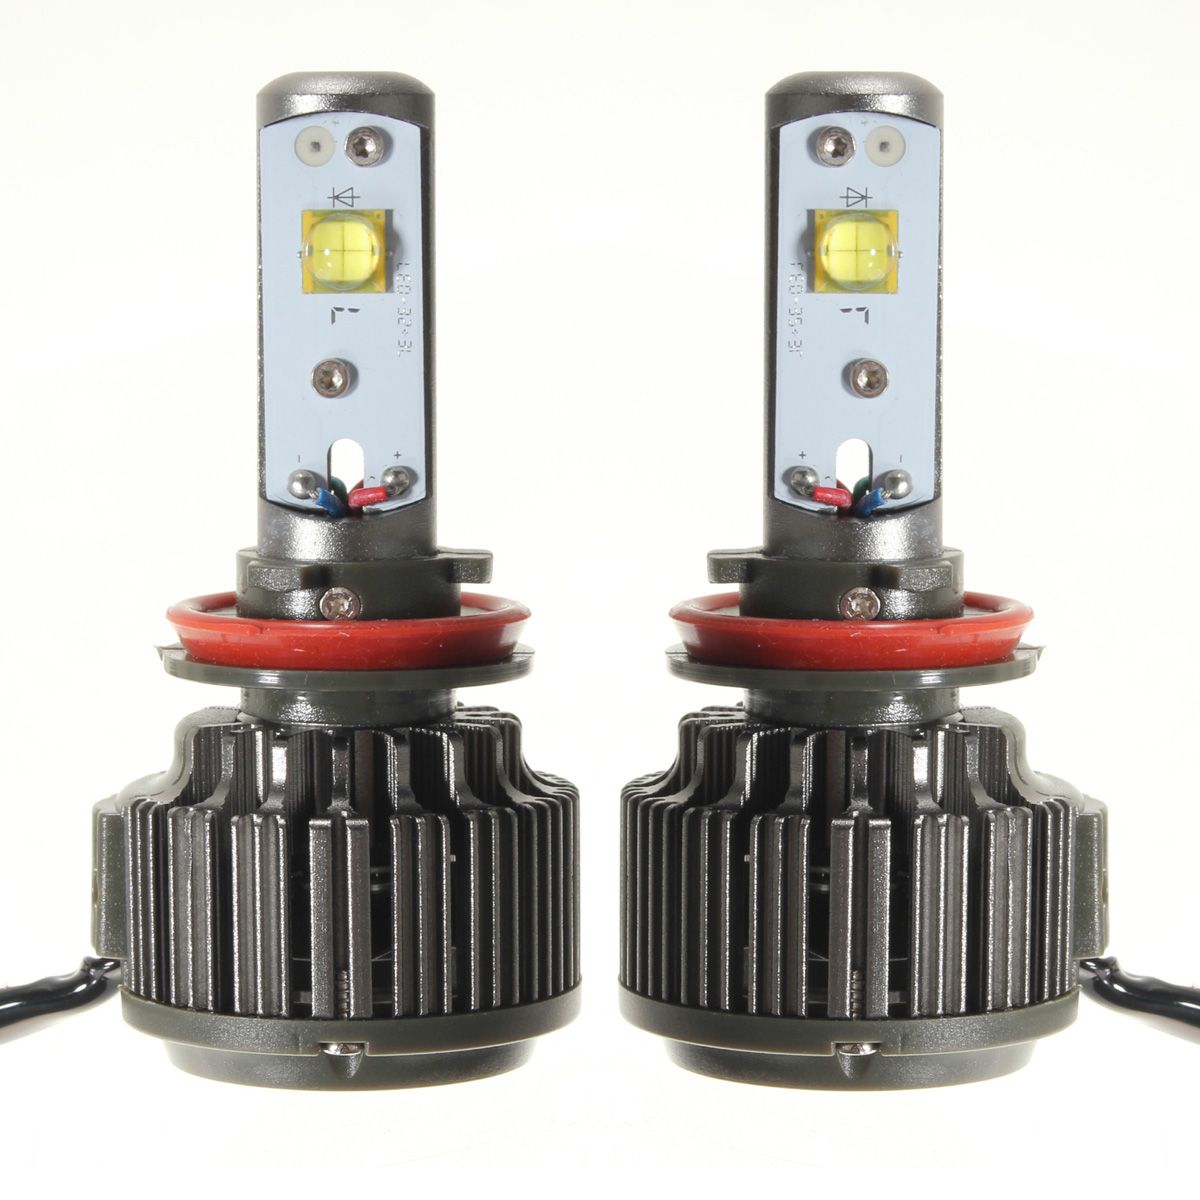 Pair-60W-Turbo-LED-Headlight-Lamp-H11-H9-H8-7200LM-6000K-with-Wire-1014681